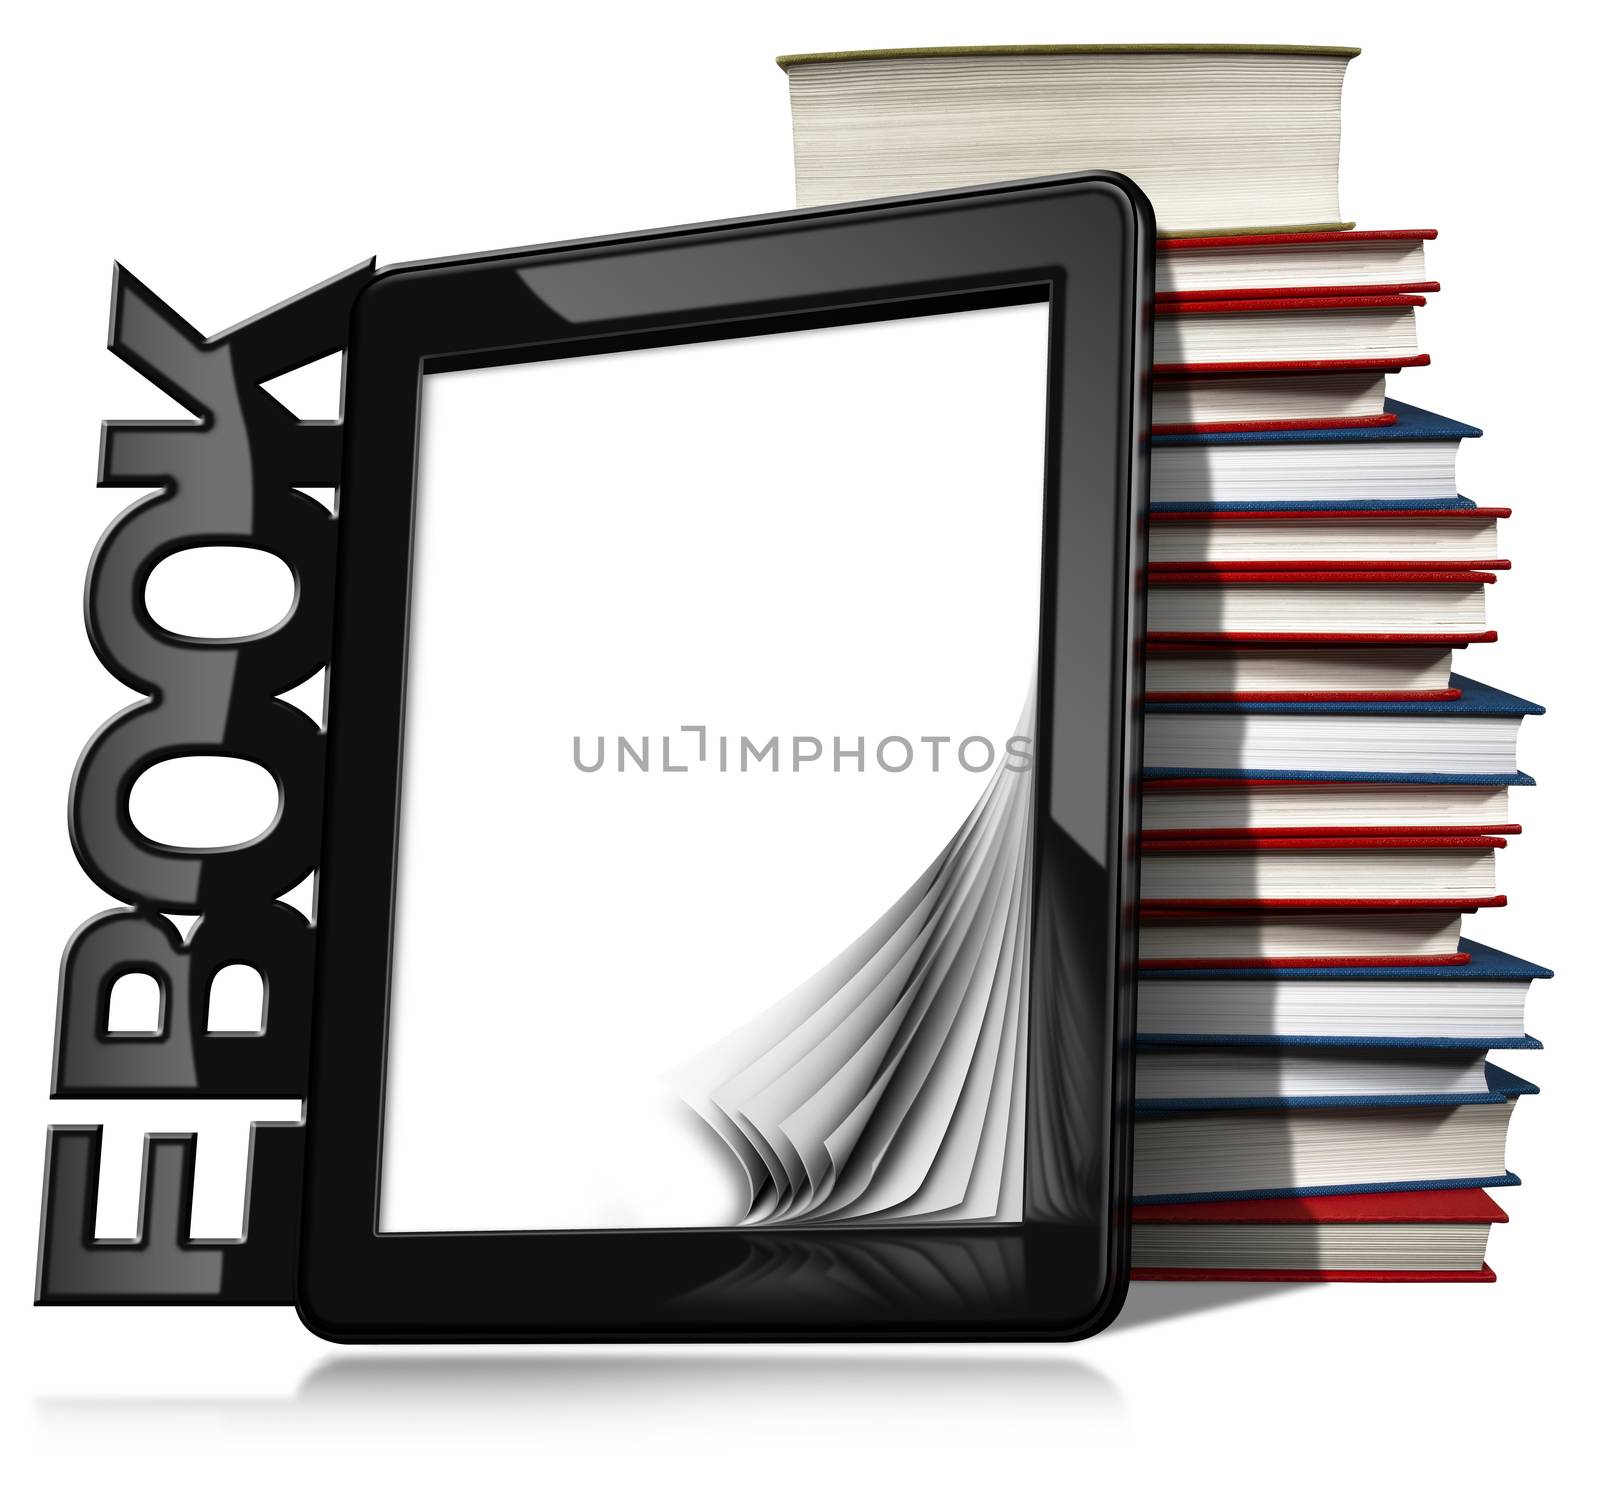 E-book Reader with Books by catalby